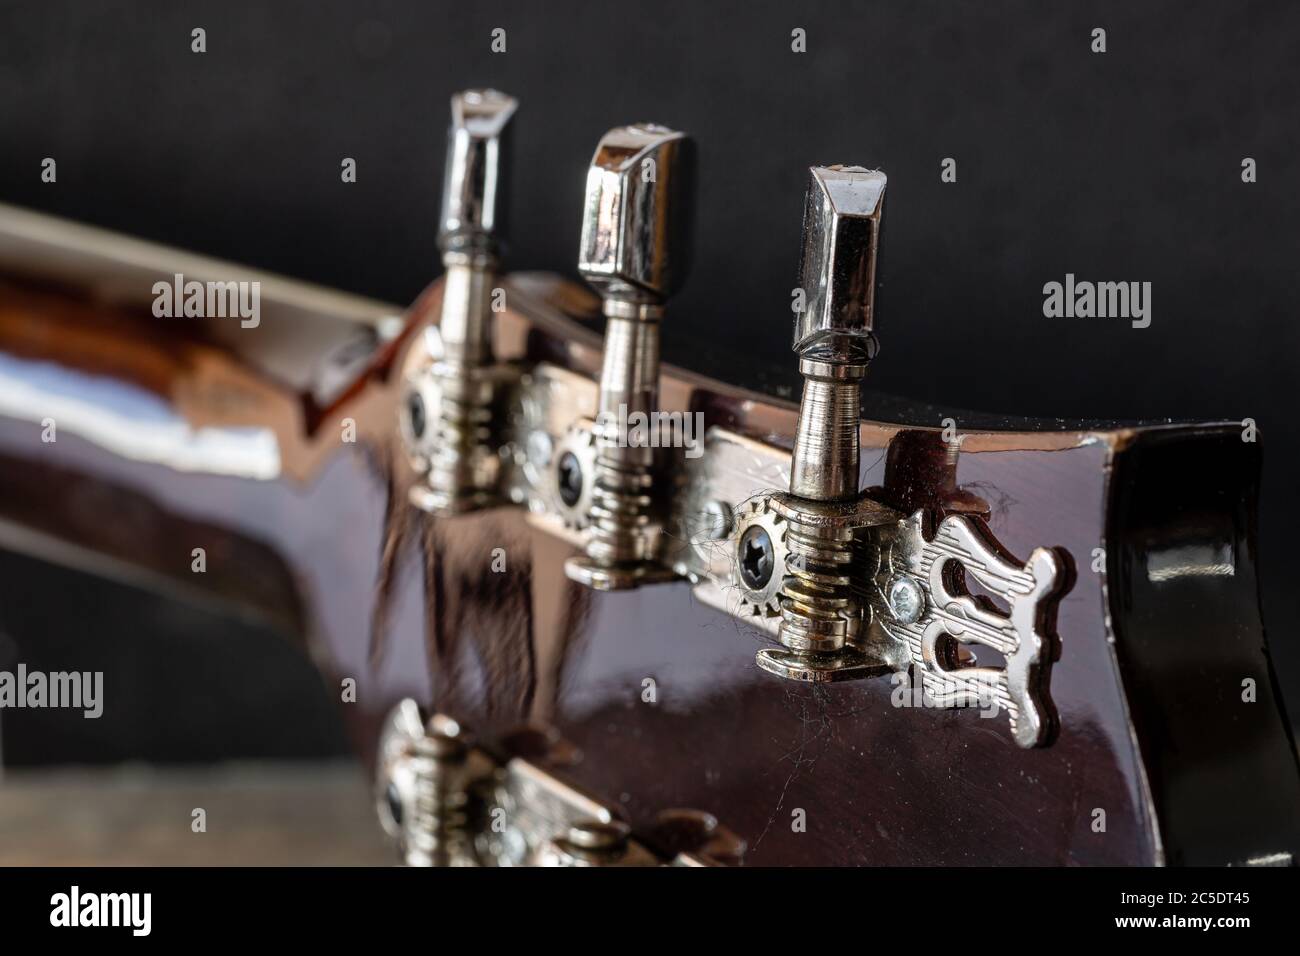 Mechanical keys for tuning the guitar. Metal strings A tuned acoustic guitar. Guitar lessons. Chrome details of the musical instrument. Stock Photo